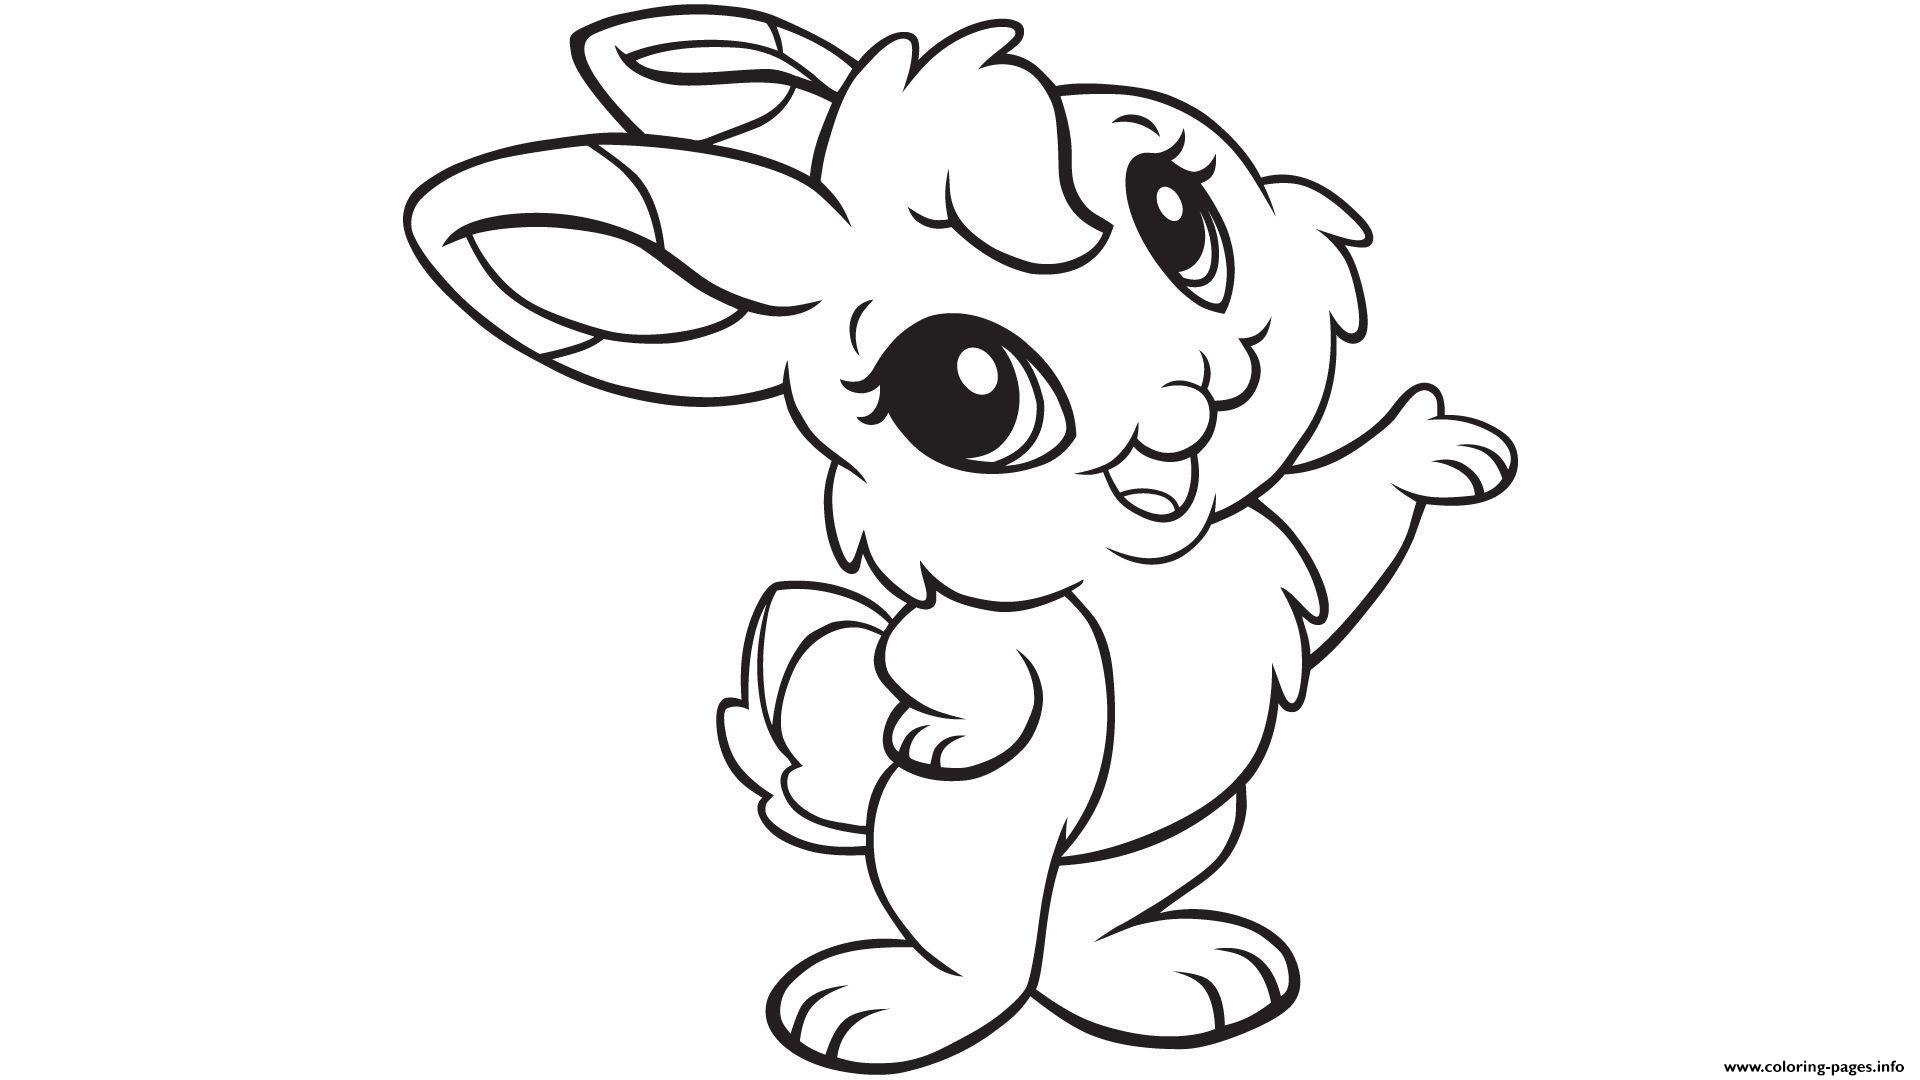 Cute Easter Bunny Coloring Pages Printable